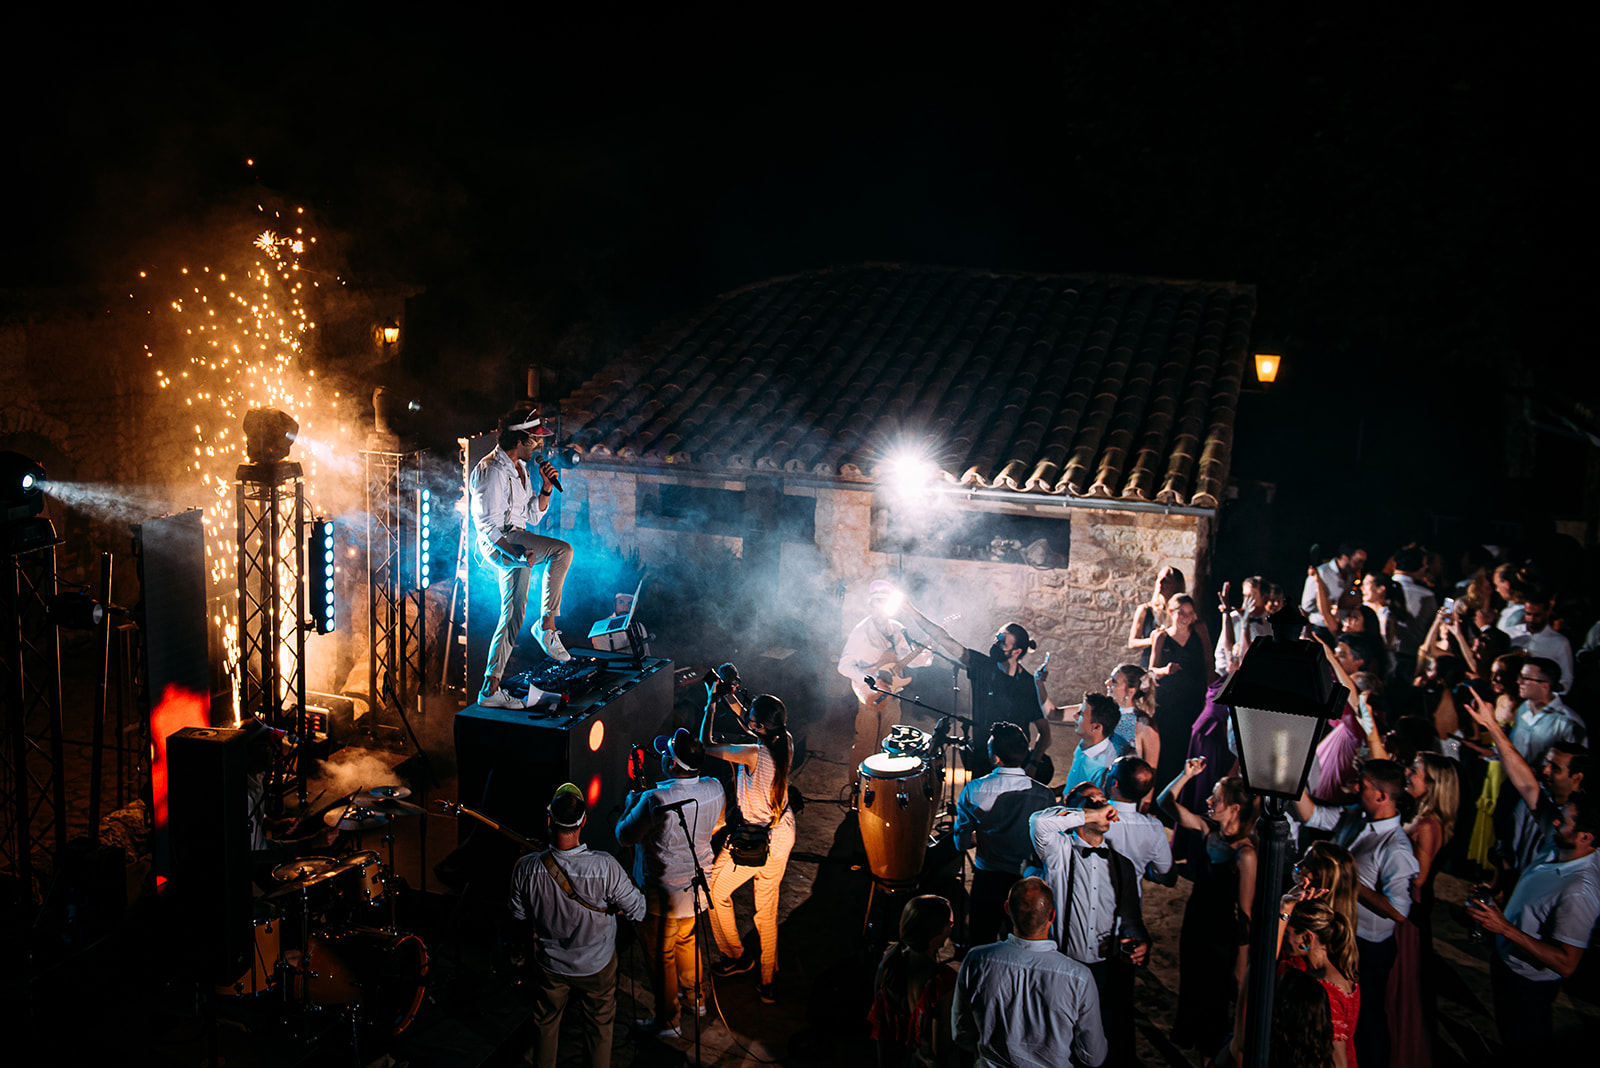 Epic party outside at night in Mallorca